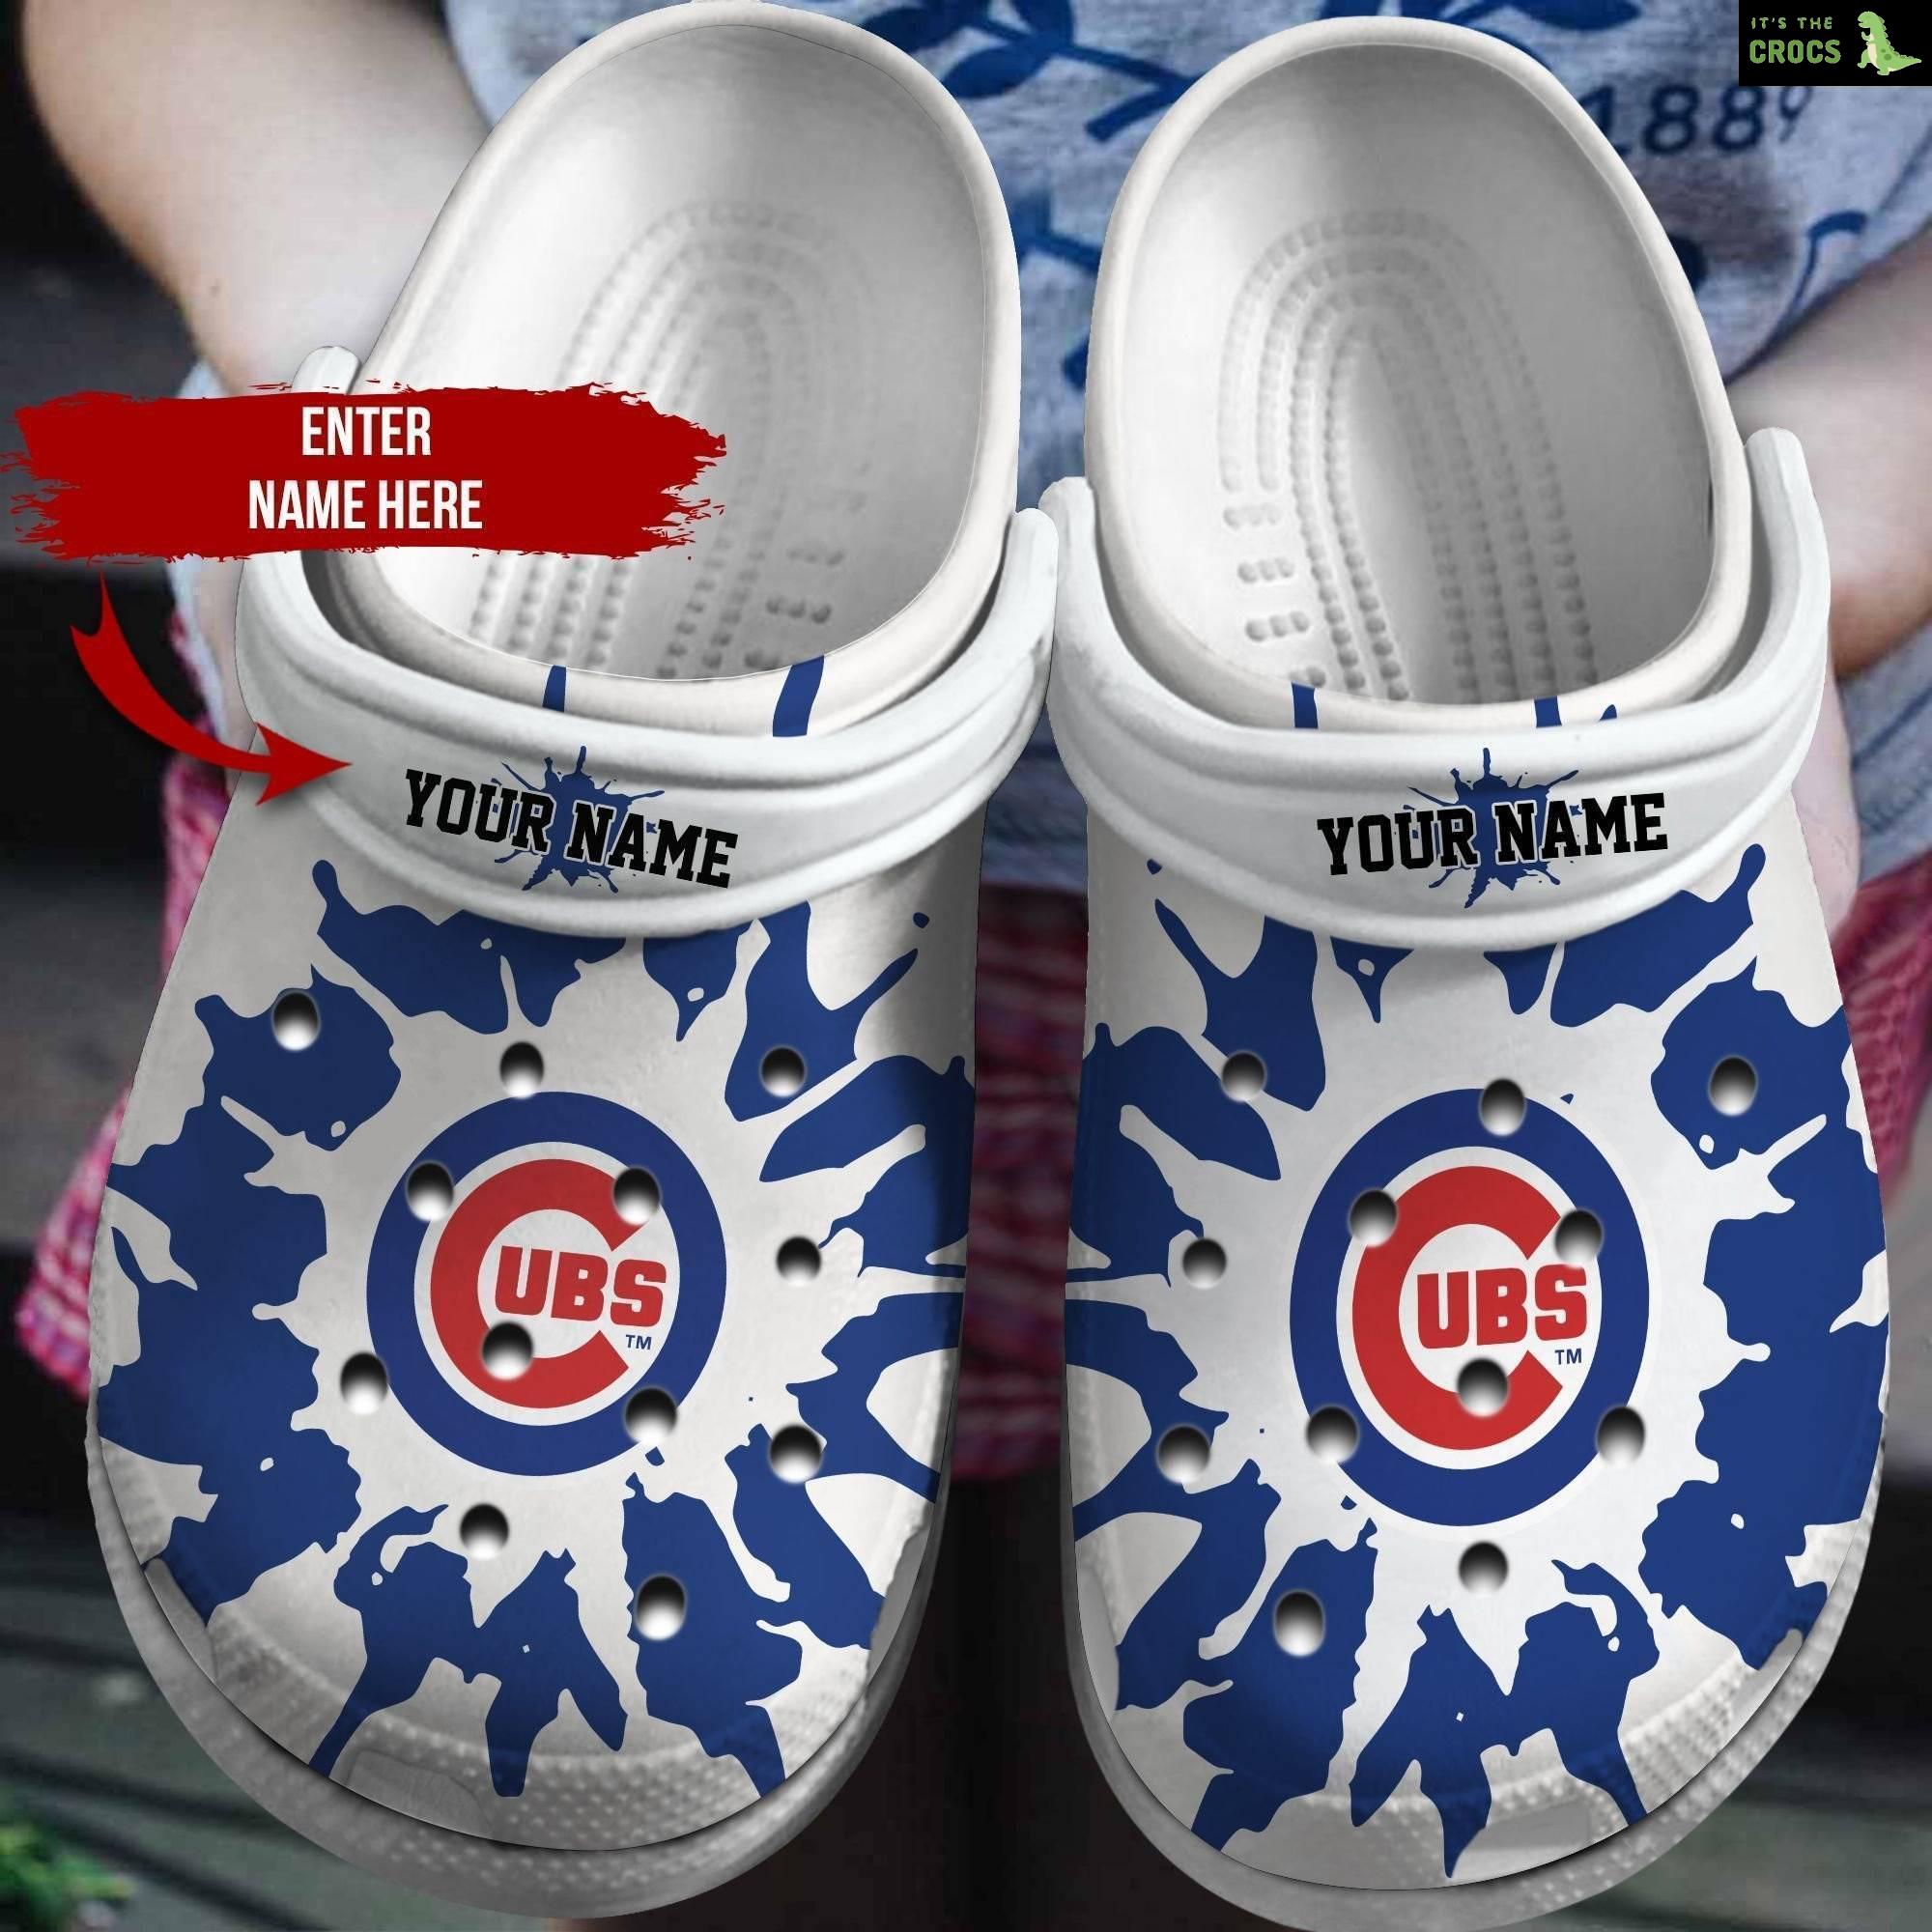 Personalized Chicago Cubs Crocbland Clog